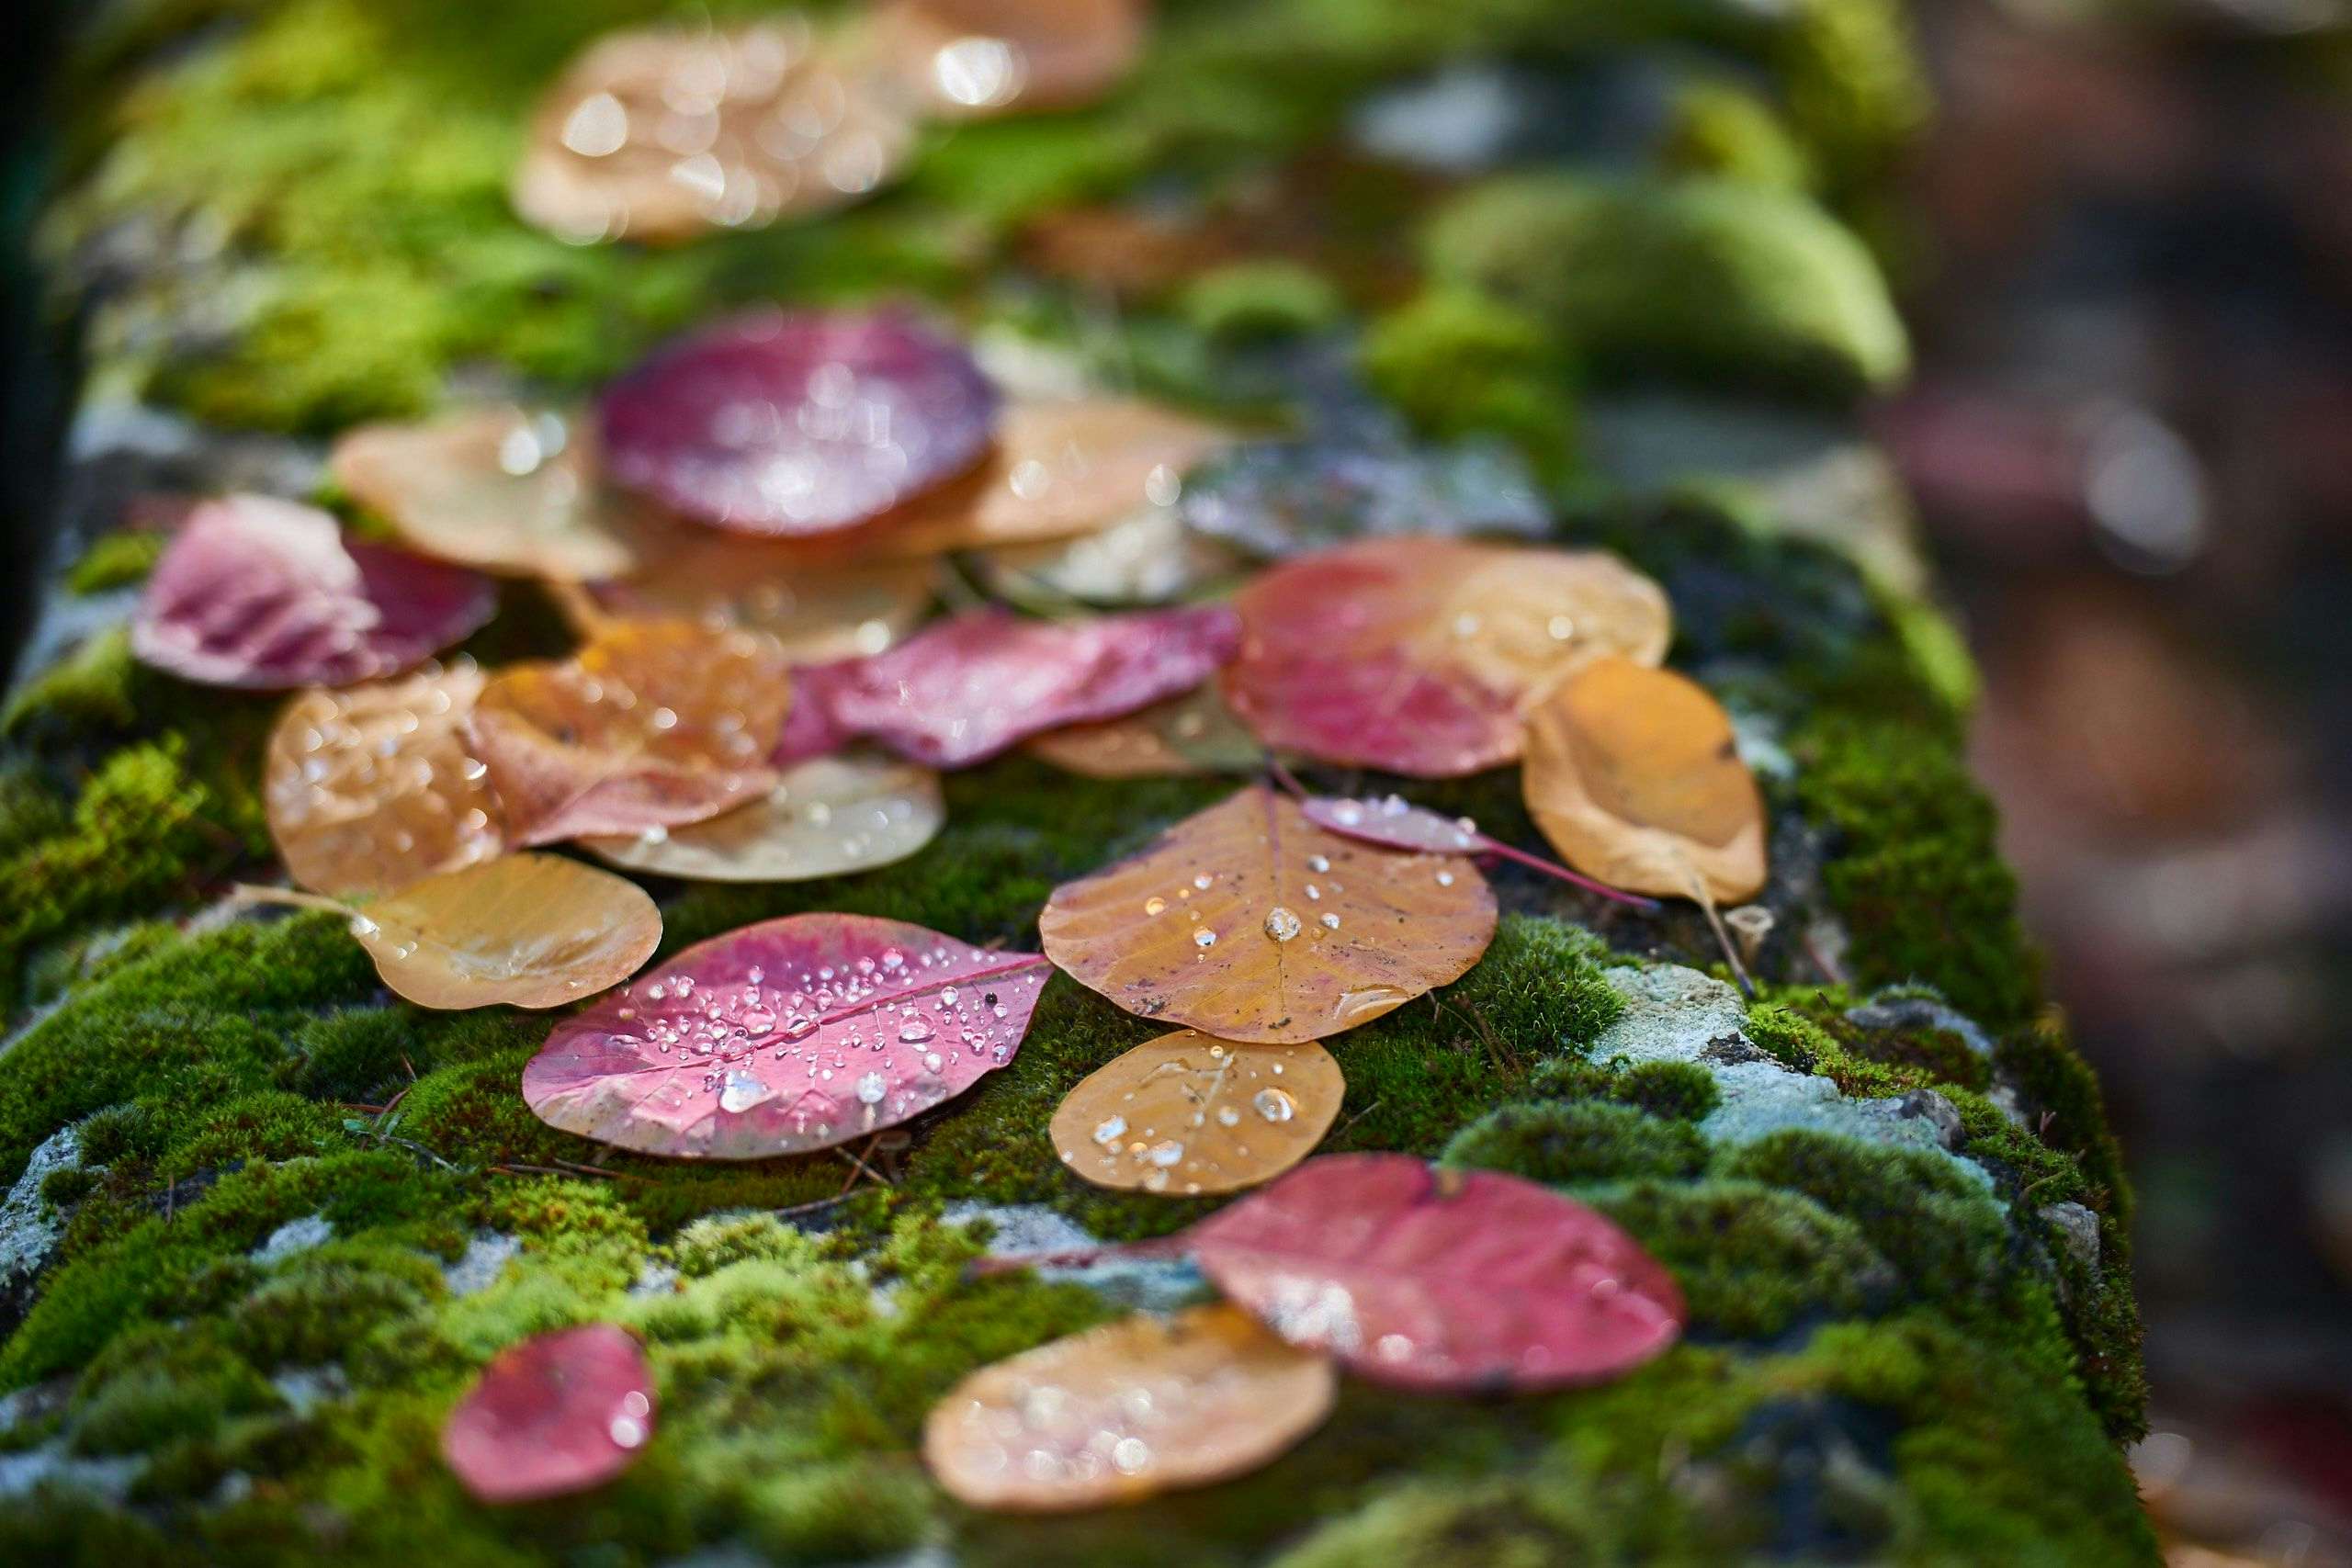 Autumn leaves on a bed of moss after the rain. Photography by Xavier Wendling.